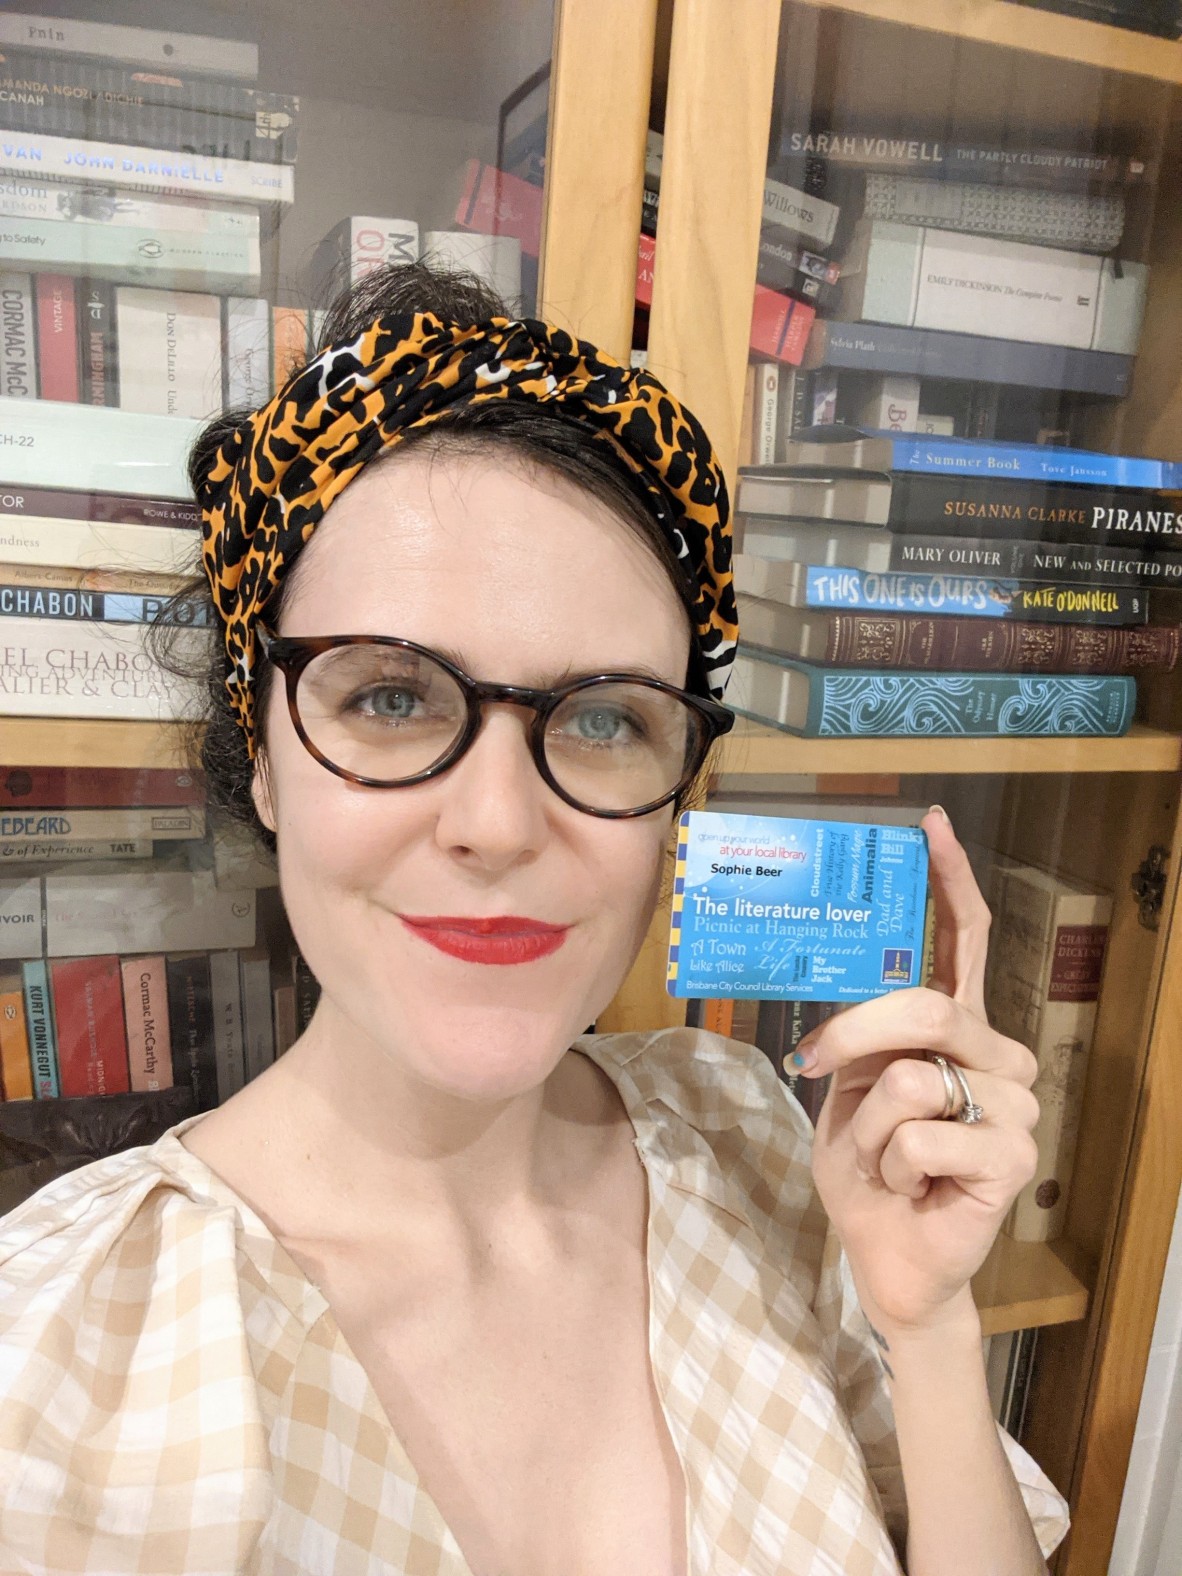 A close up of Sophie Beer who wears a headband and stands in front of a book shelf holding her library card